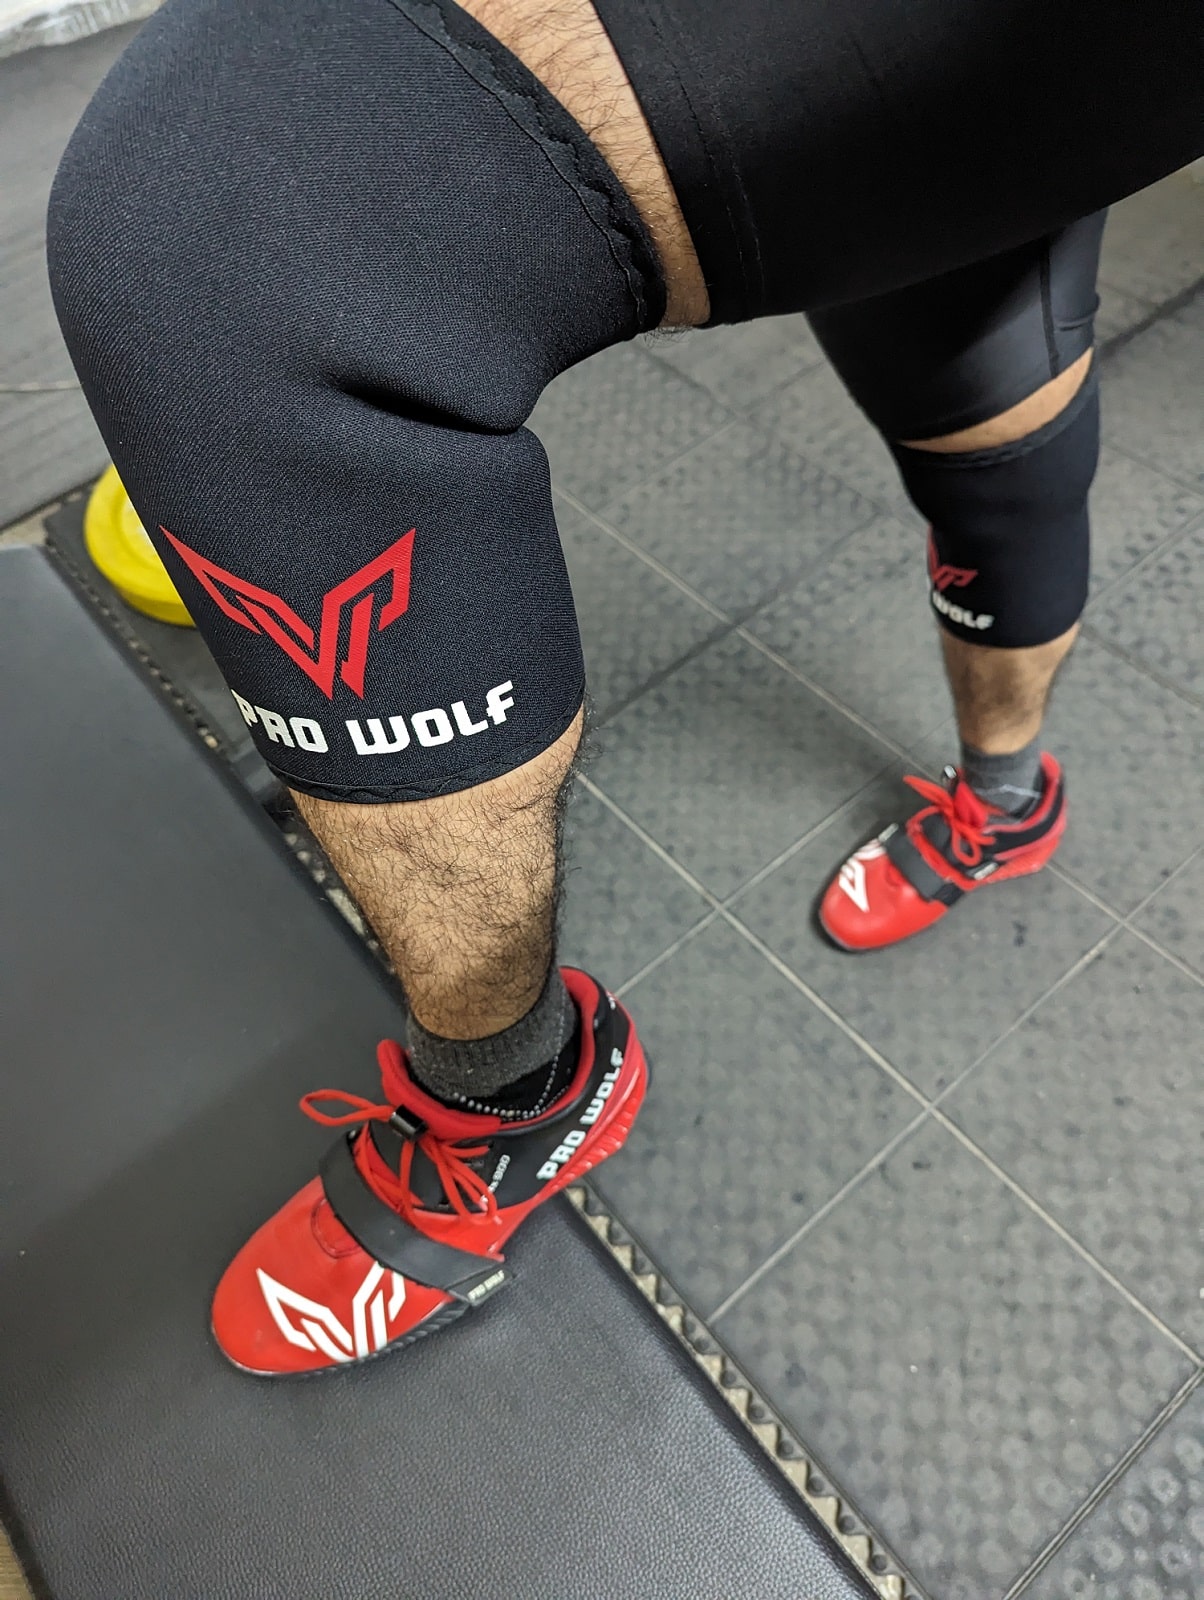 best knee sleeves for gym use